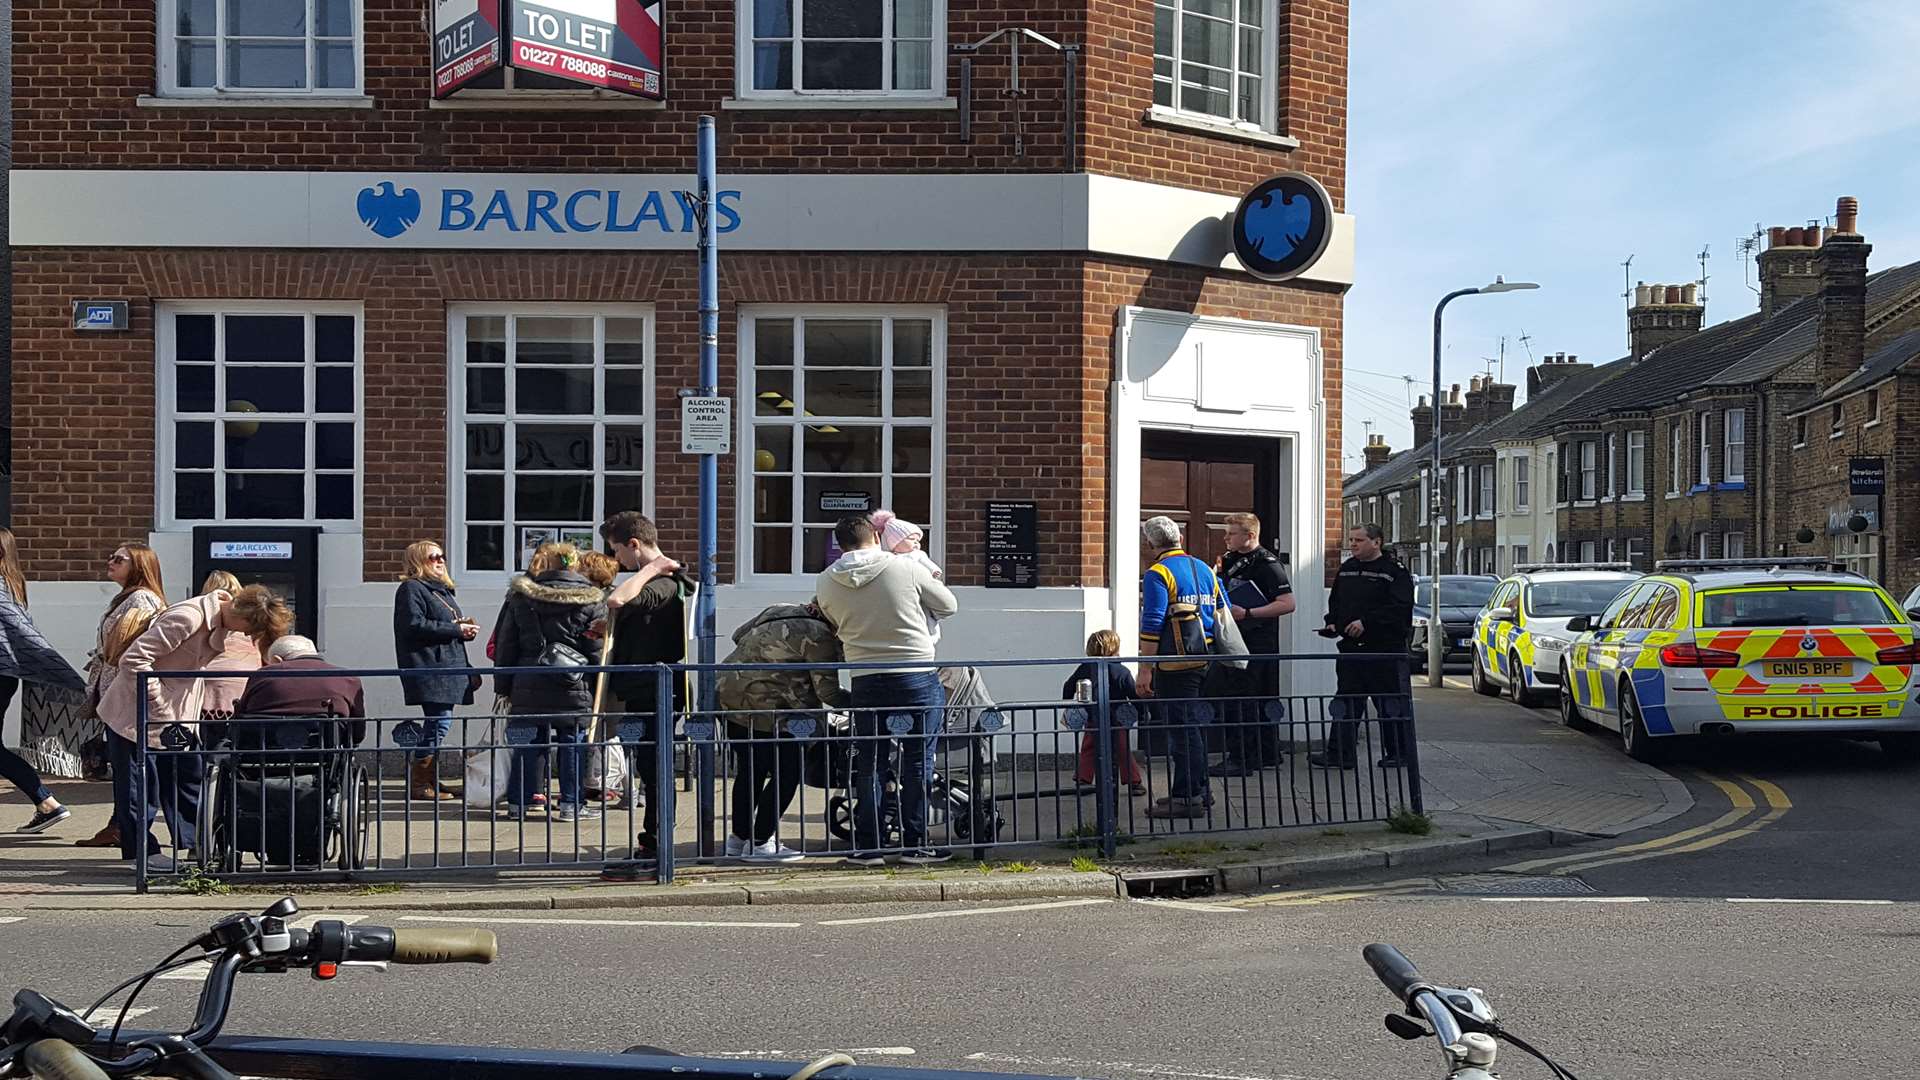 Barclays Bank in Whitstable